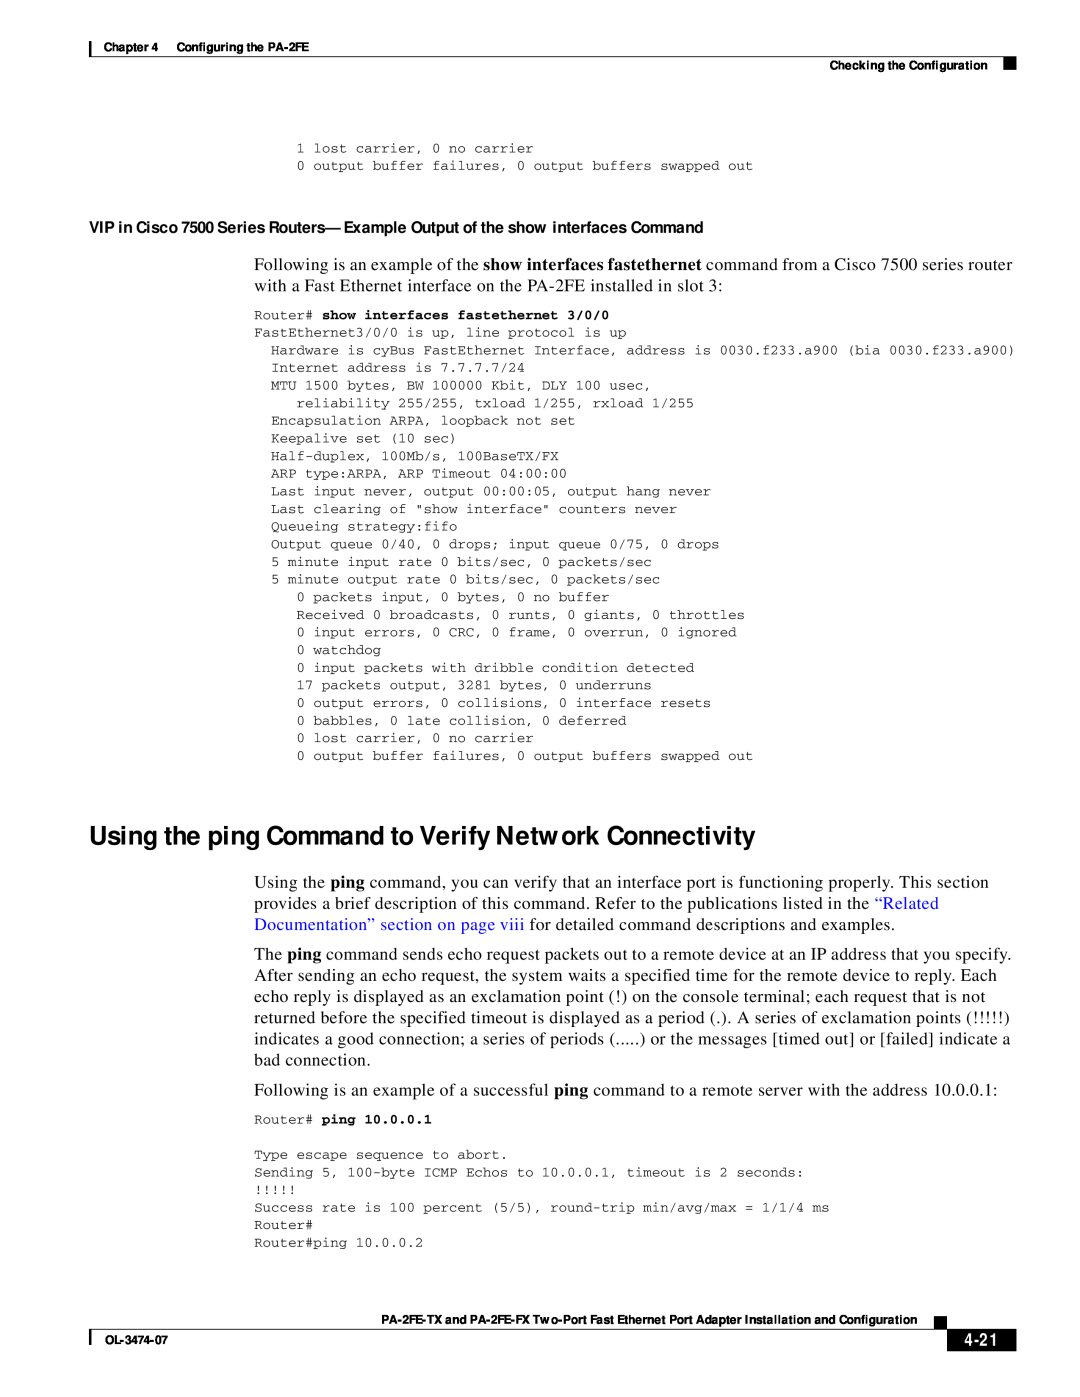 Cisco Systems PA-2FE-FX, PA-2FE-TX manual Using the ping Command to Verify Network Connectivity, 4-21 